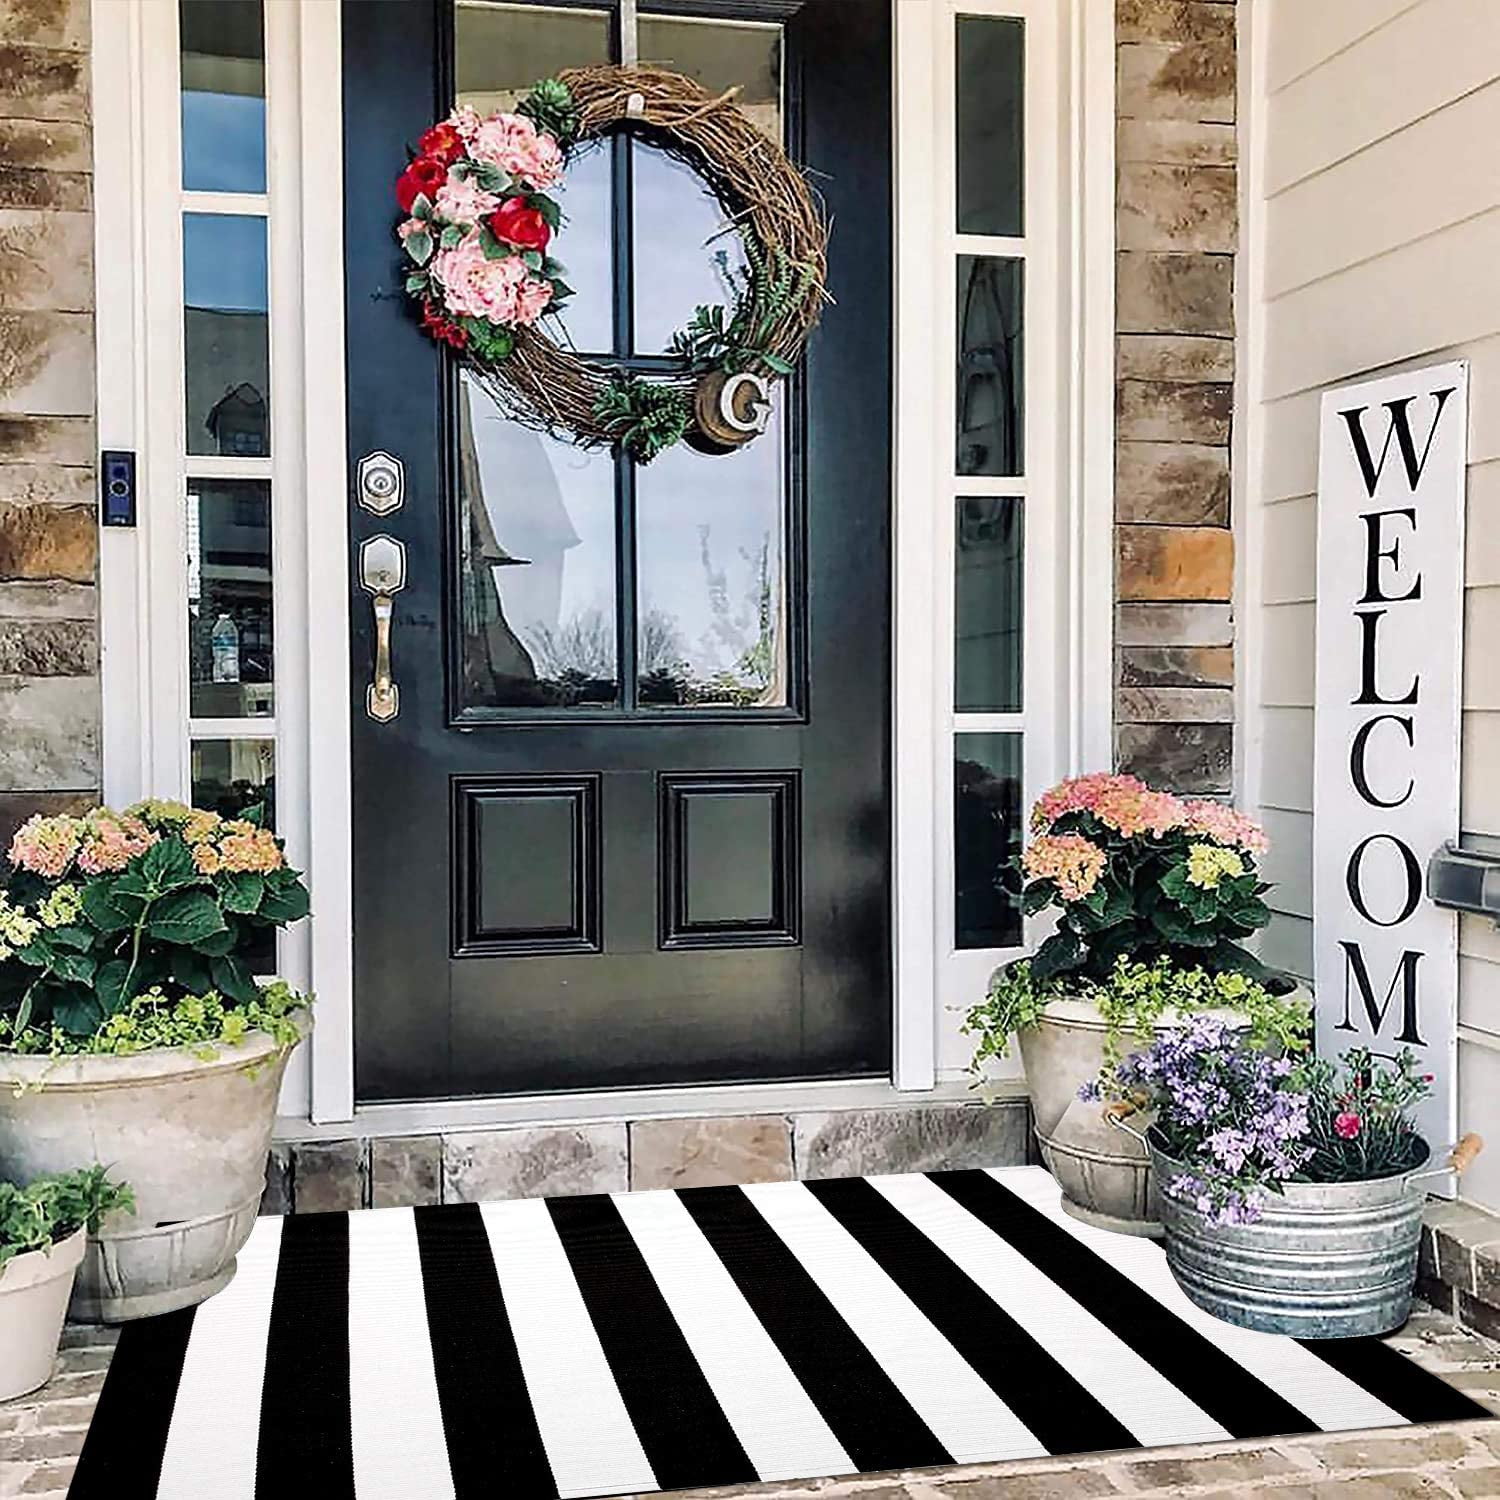 Prironde Welcome Mats for Front Door-Outdoor Indoor Kitchen Mat Red and Black Buffalo Plaid Retro Door Mats for Home Entrance Non-Slip Bathroom Rugs Washable